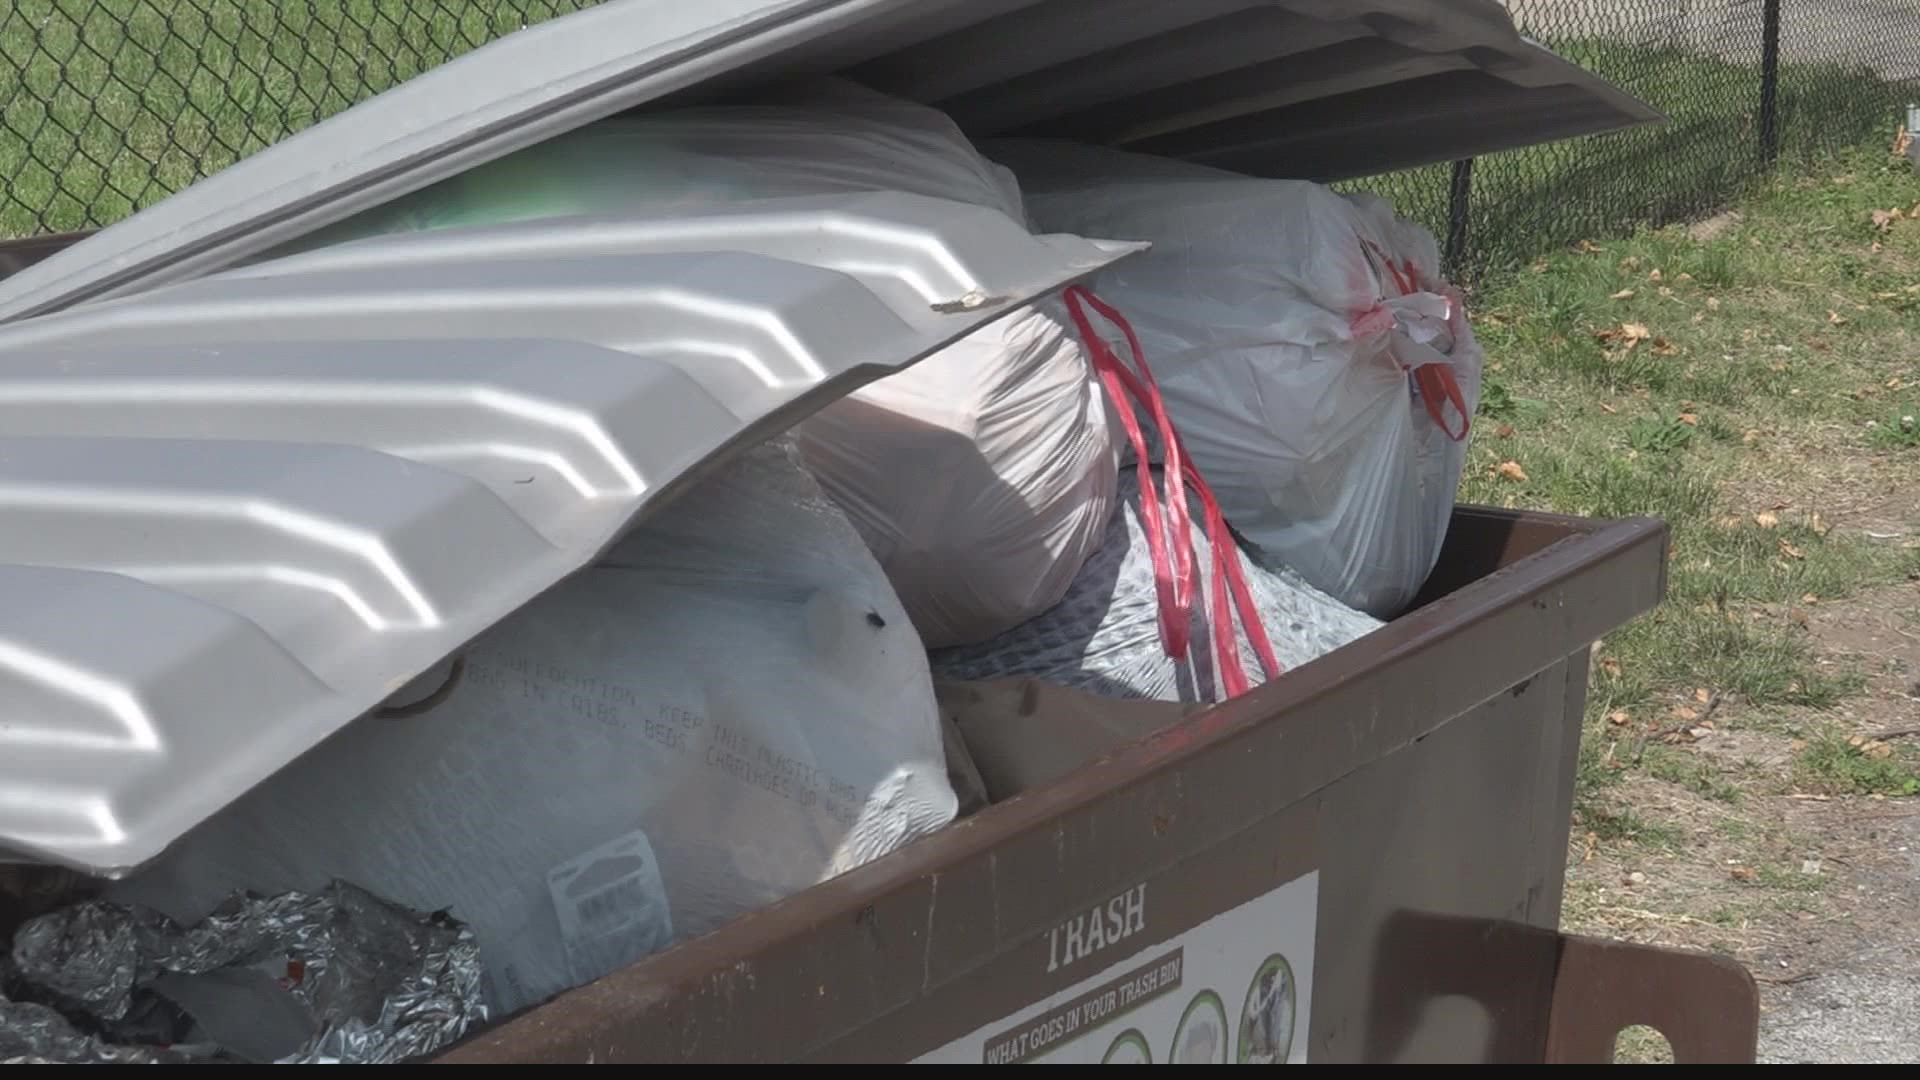 A city spokesperson said they are offering a $3,000 bonus for new trash truck drivers to try to fill an ongoing worker shortage.